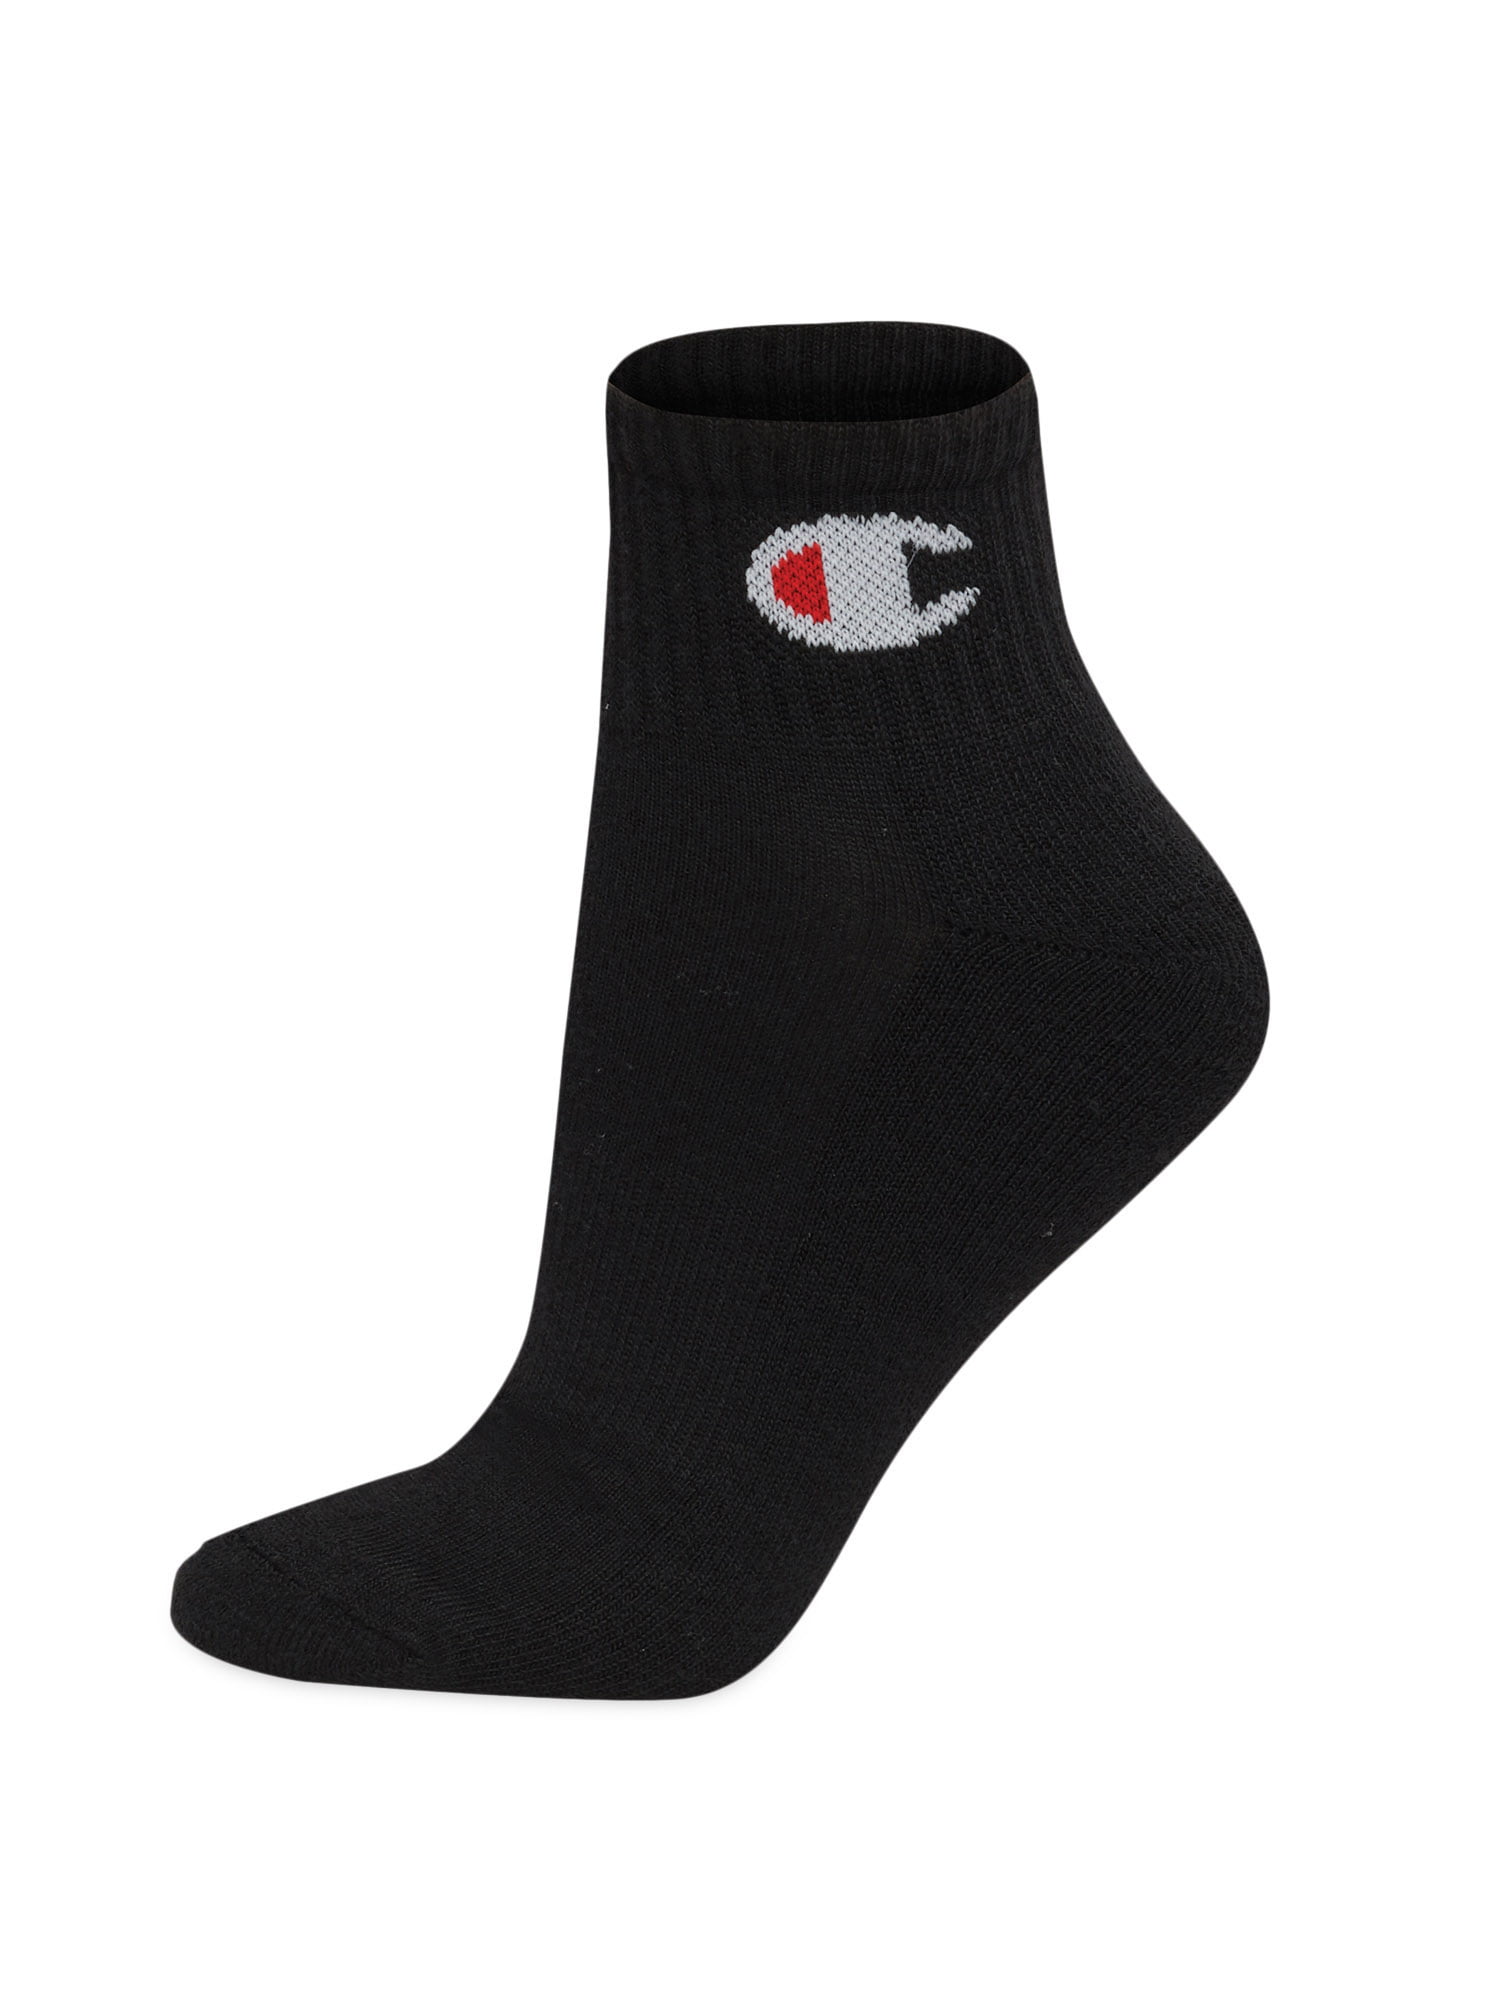 Champion Women's Athletic Ankle Sock, 6 Pack 